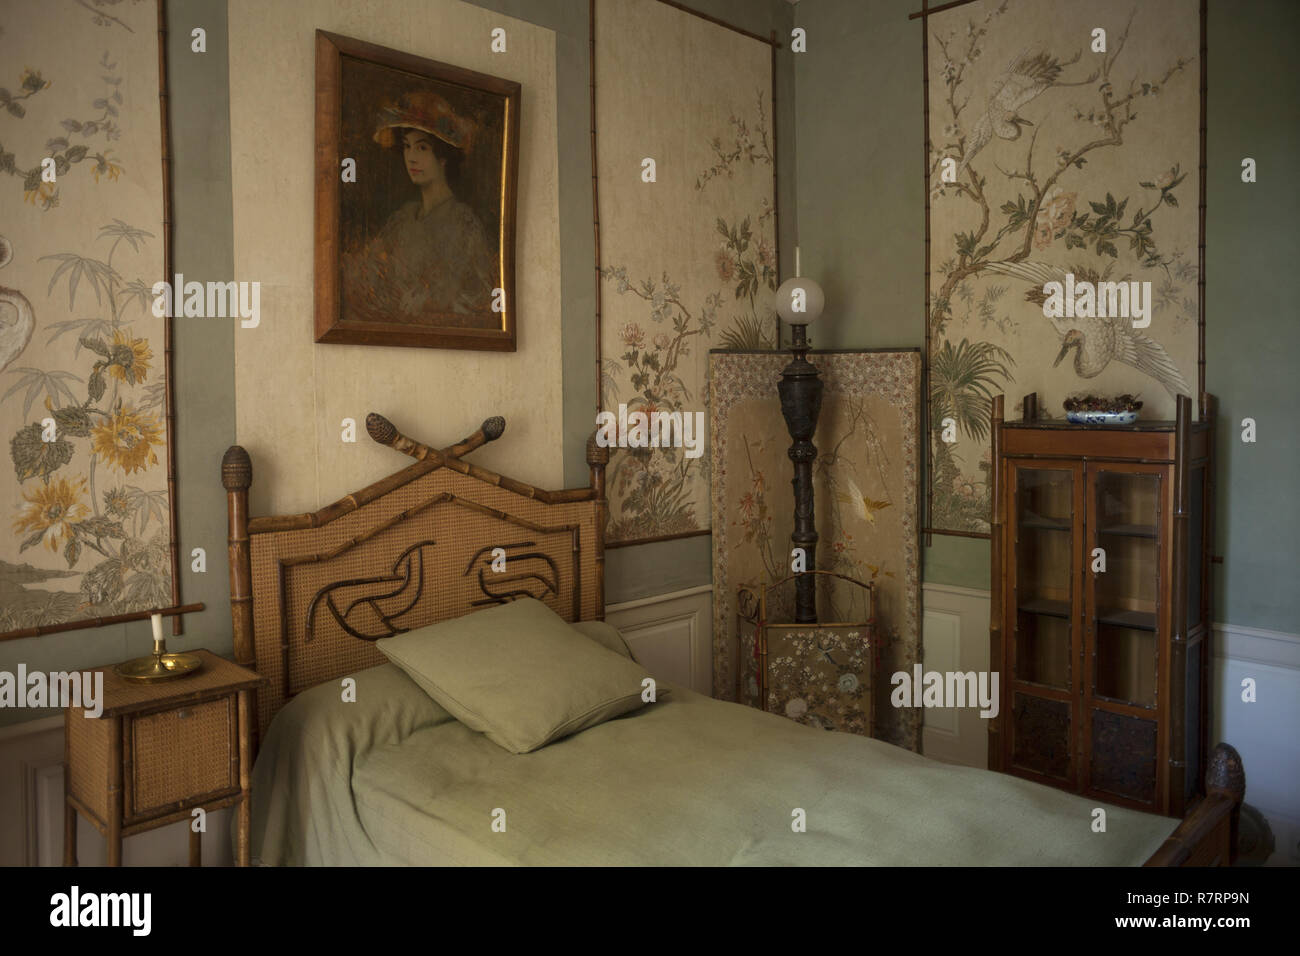 Nohant-Vic, the castle of George Sand (Le château de George Sand). Interior. A sleeping room. Schlafzimmer Stock Photo